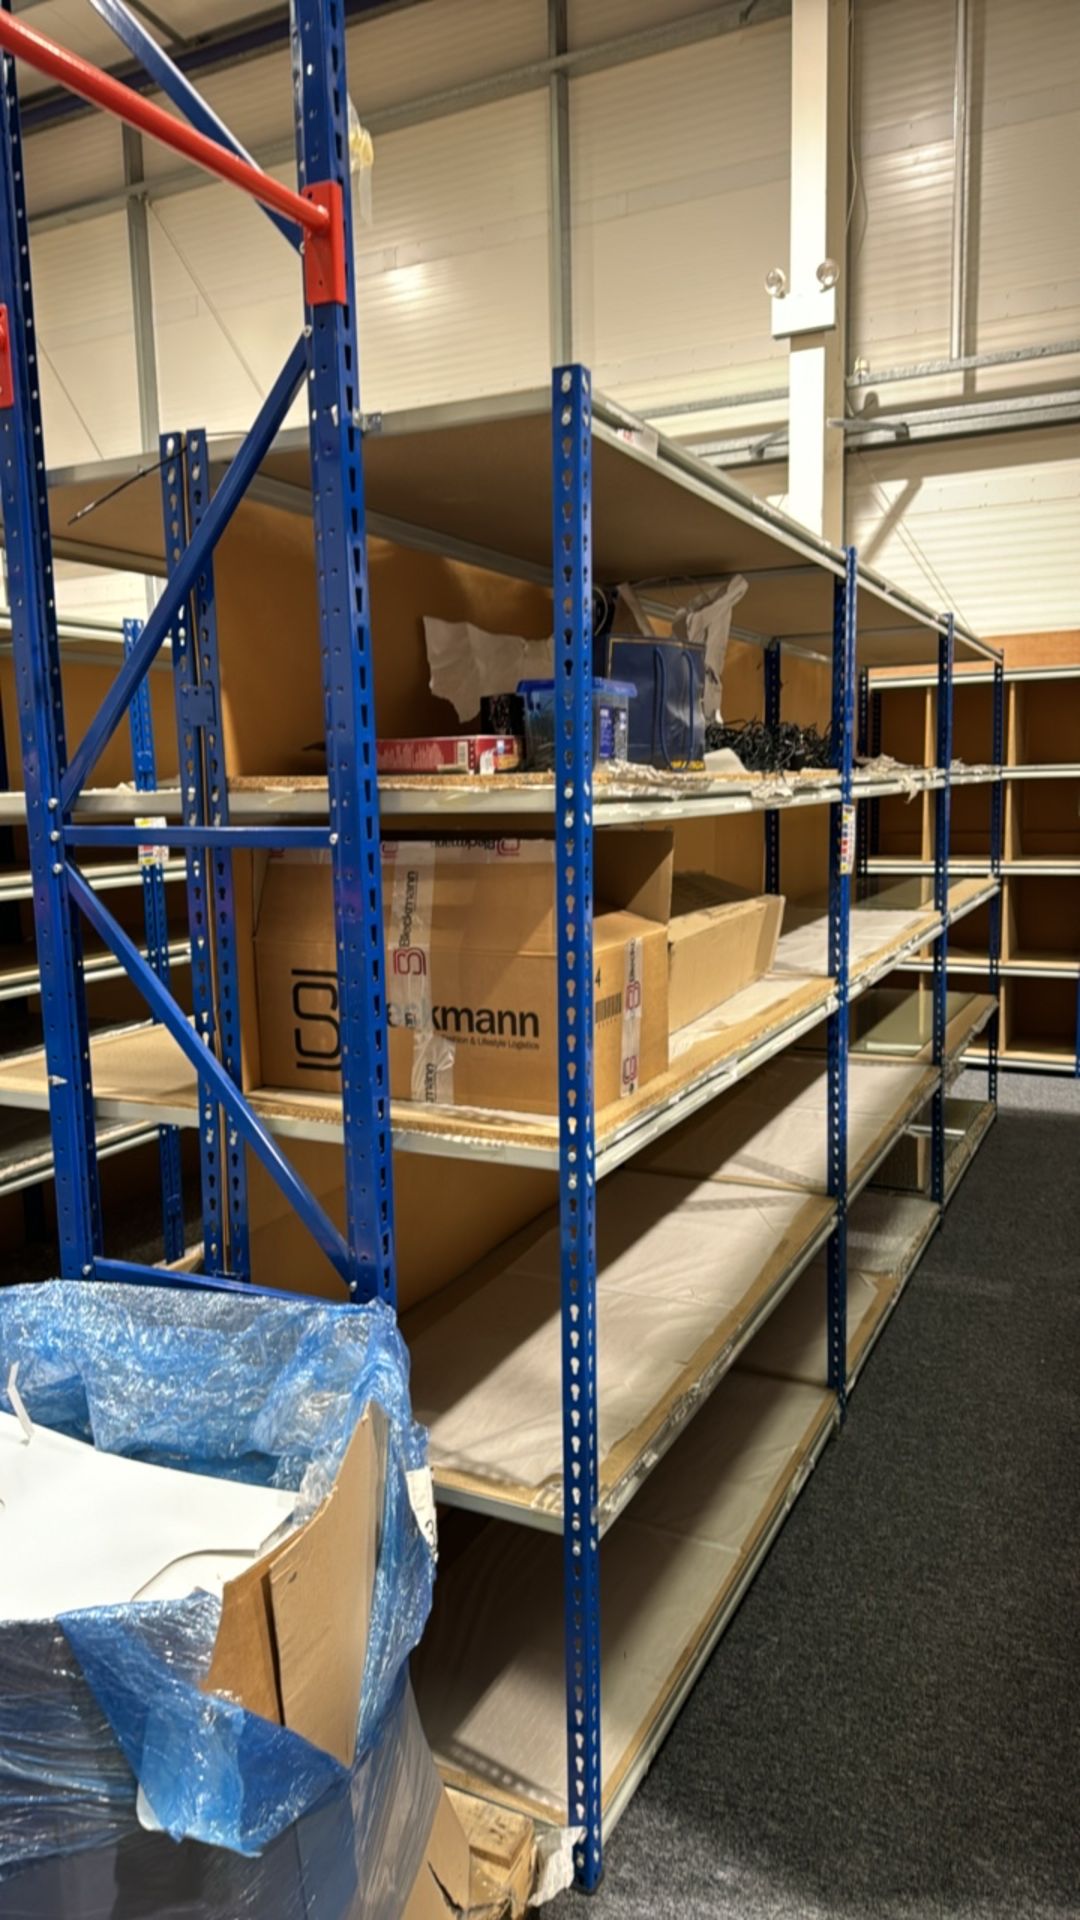 6 Bays Of Back To Back Boltless Racking - Image 2 of 4